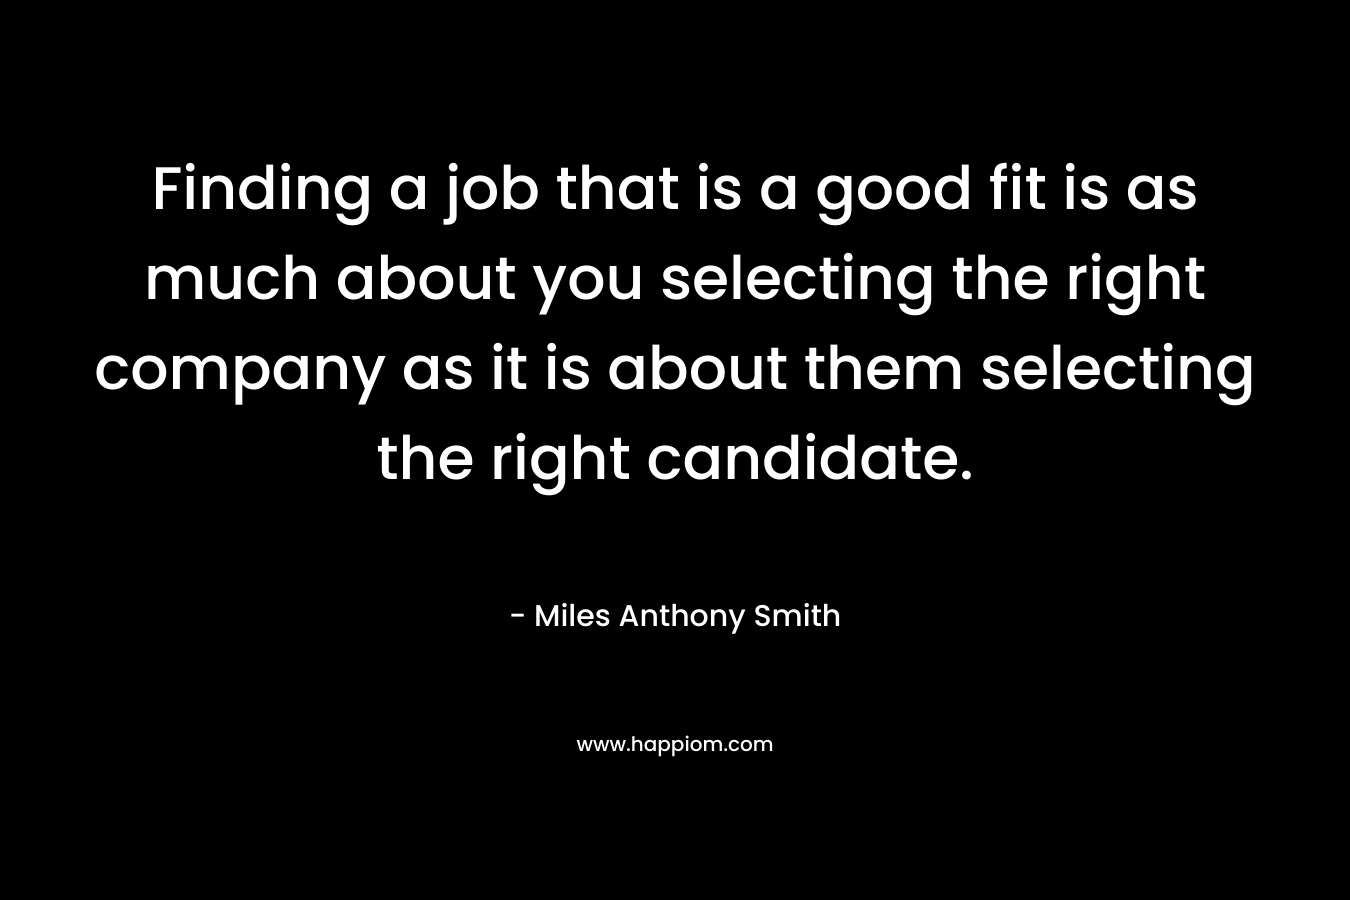 Finding a job that is a good fit is as much about you selecting the right company as it is about them selecting the right candidate.